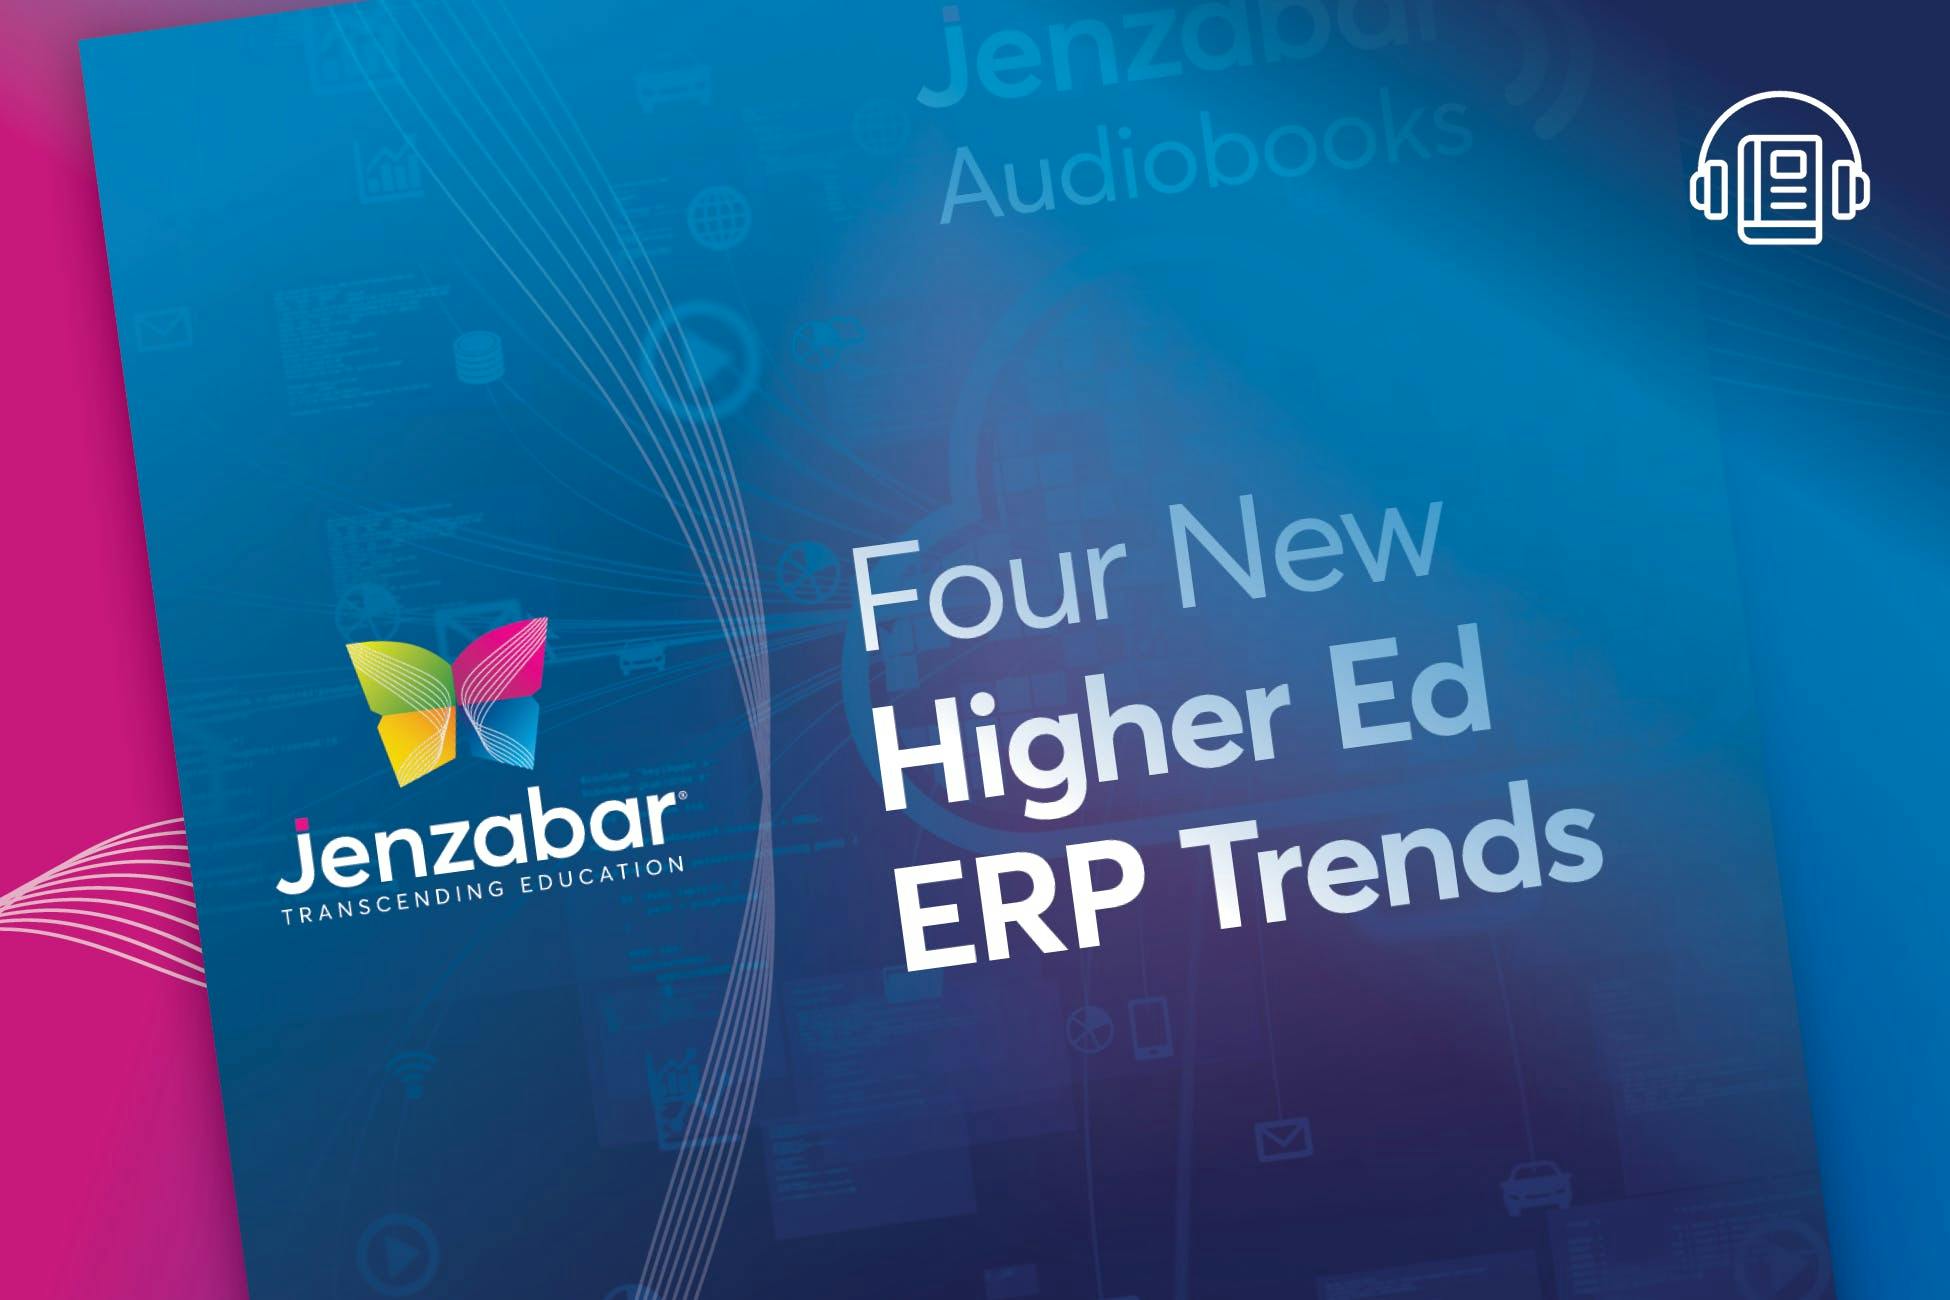 Audiobook: Four New Higher Ed ERP Trends